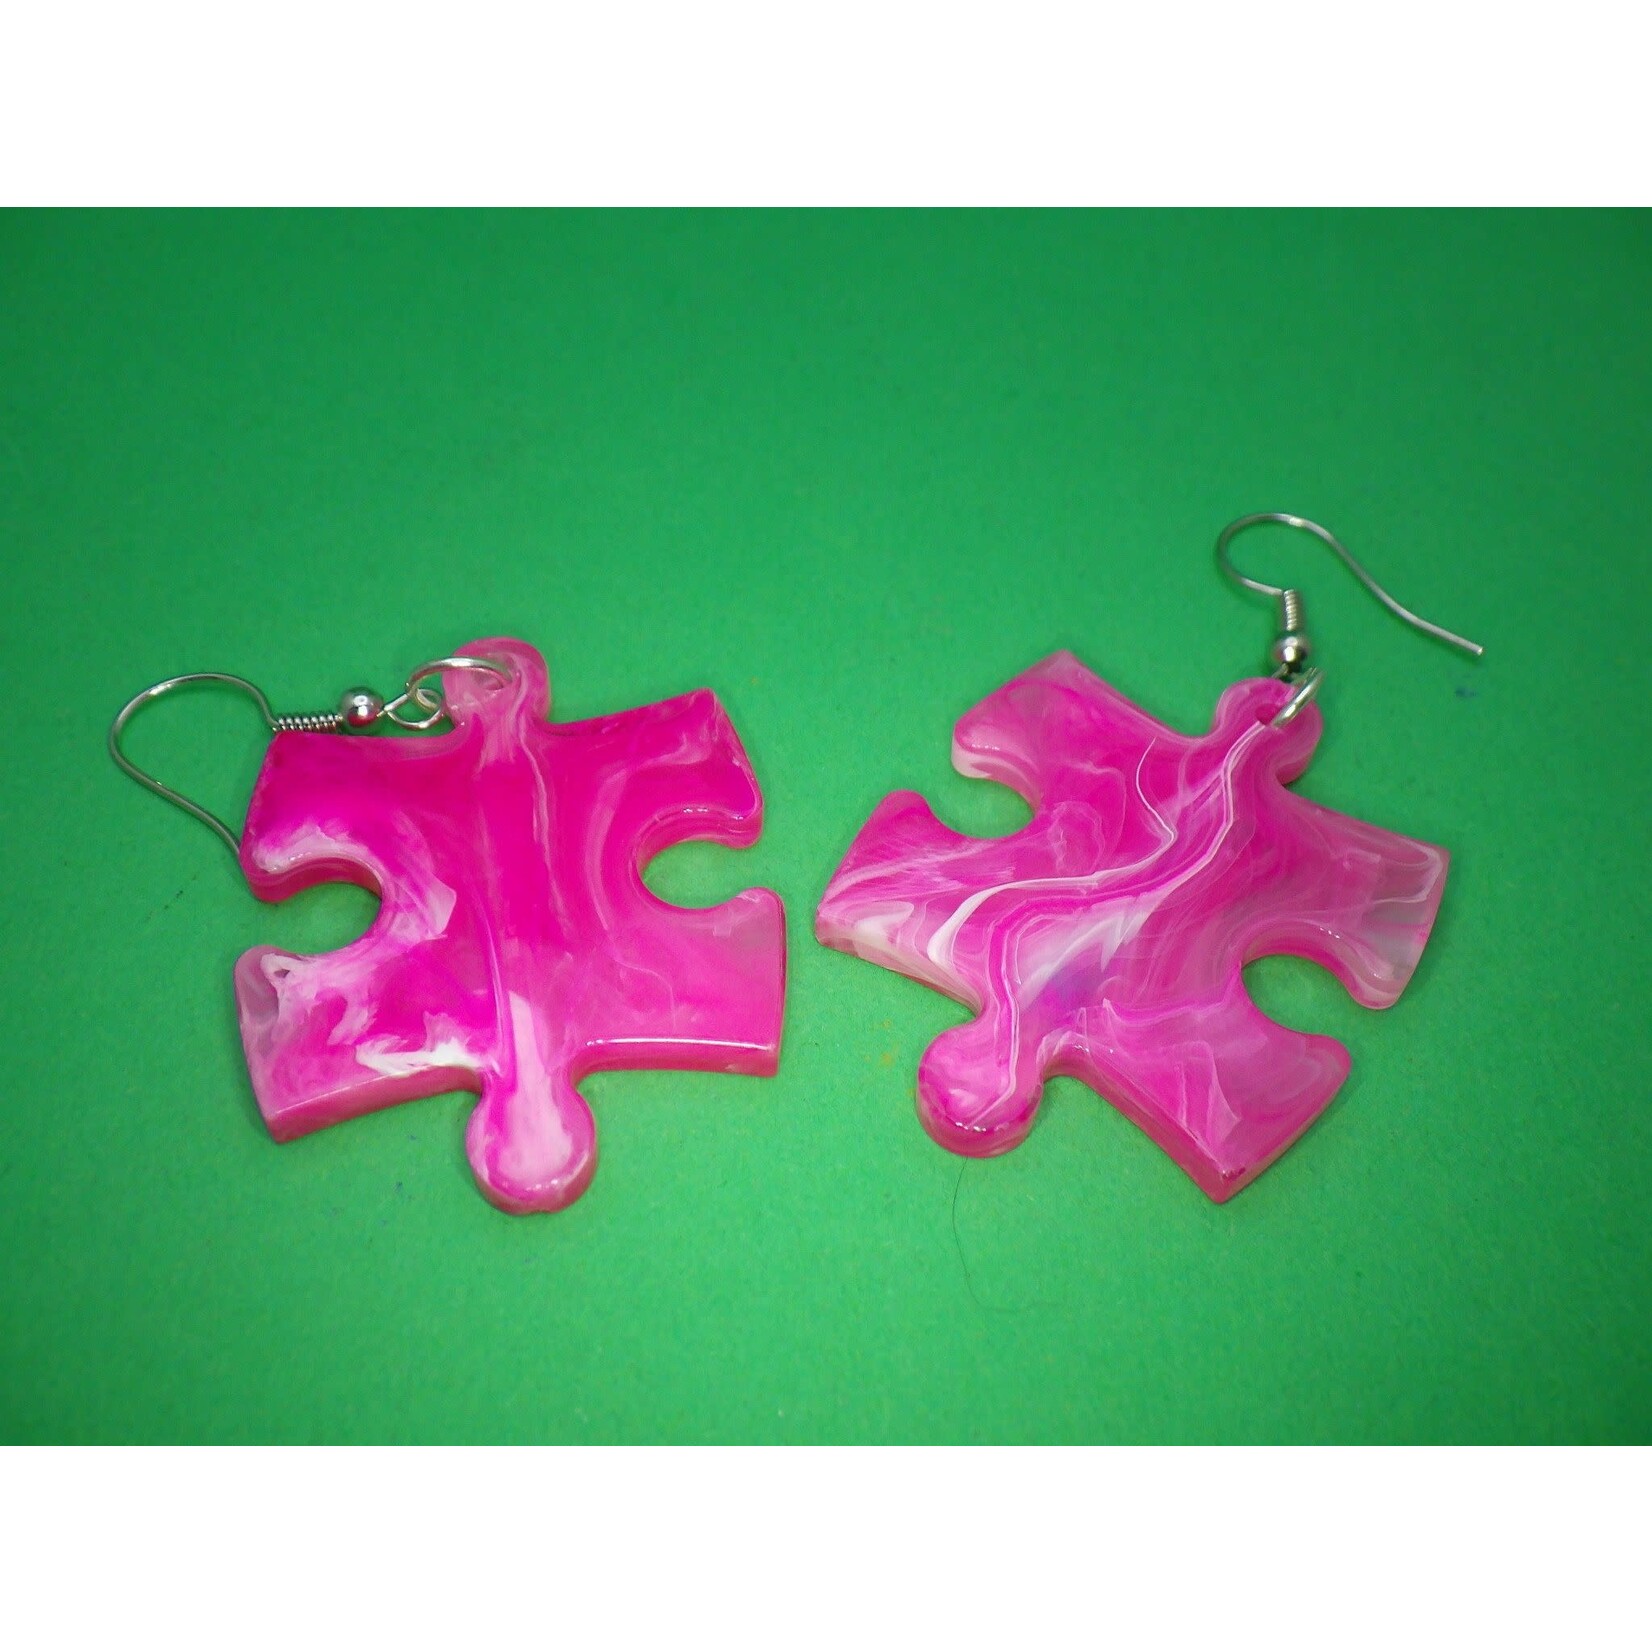 Chessex Earrings Borealis Puzzle Piece Pair (Assorted Dice Colors)